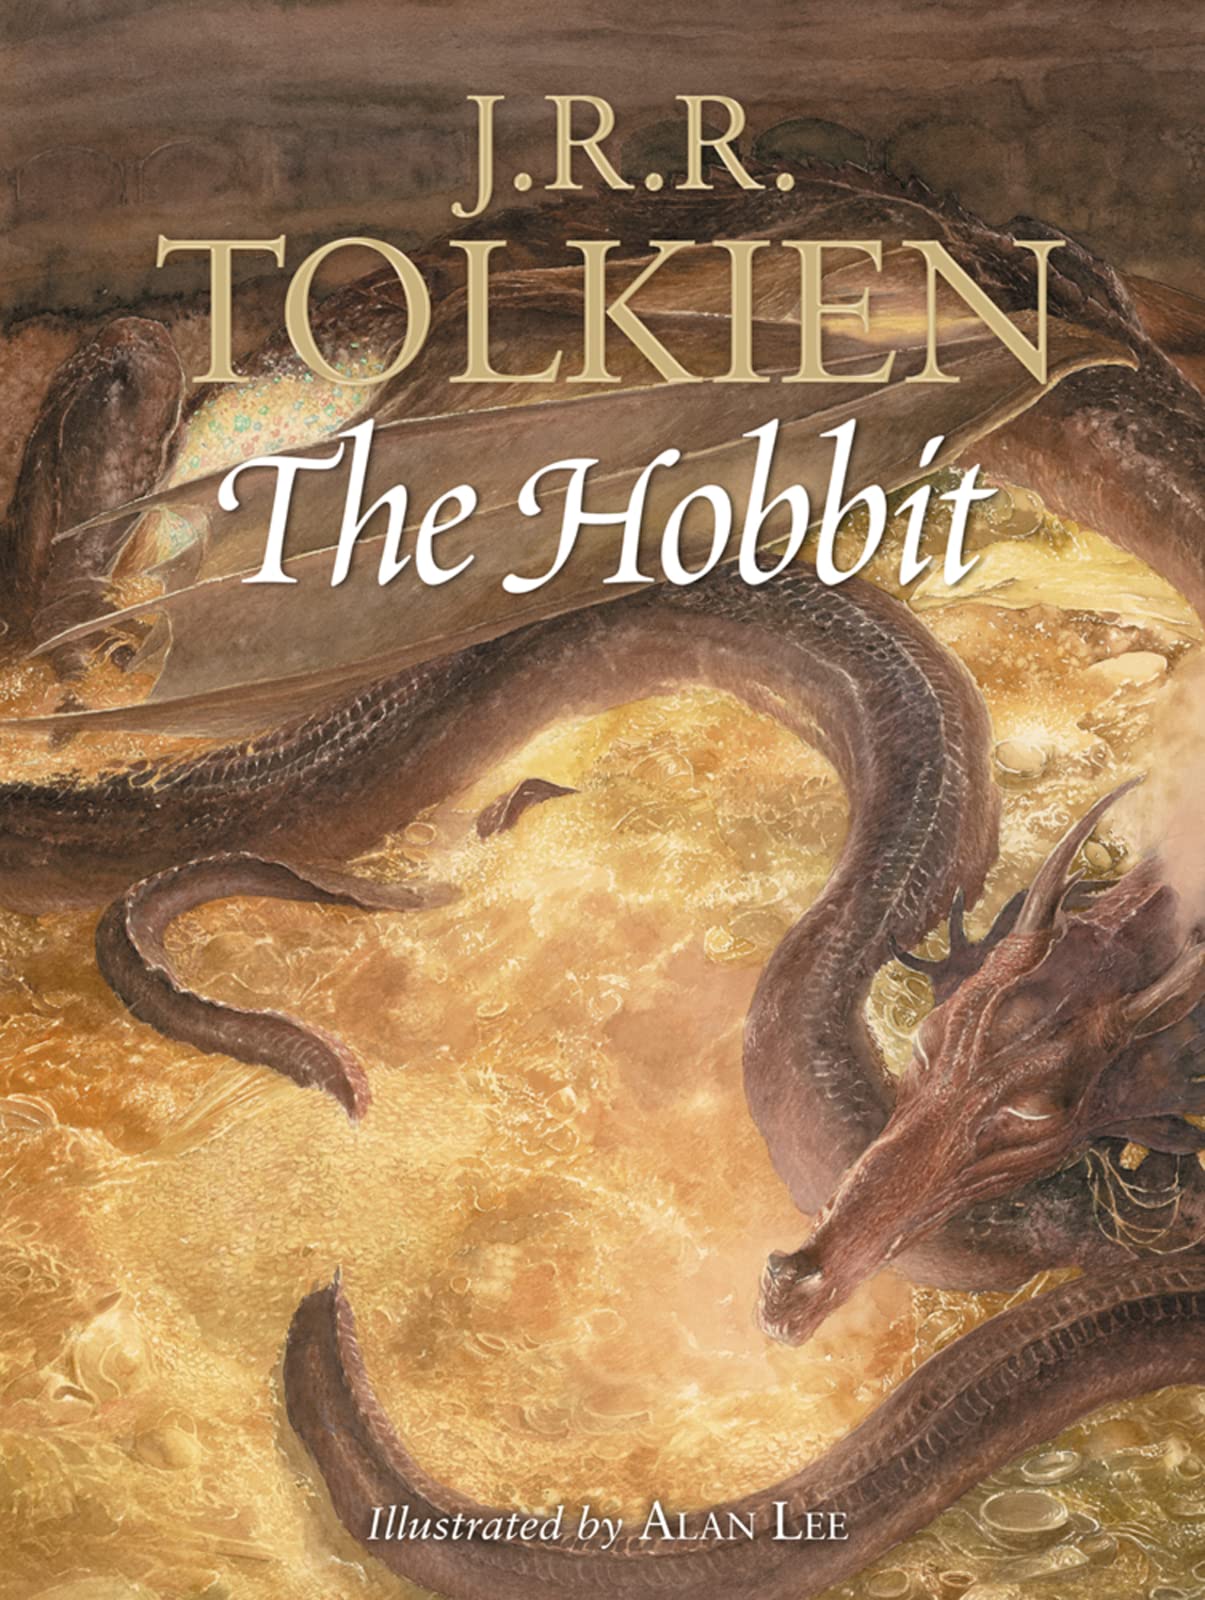 the hobbit book covers 1997 hardcover